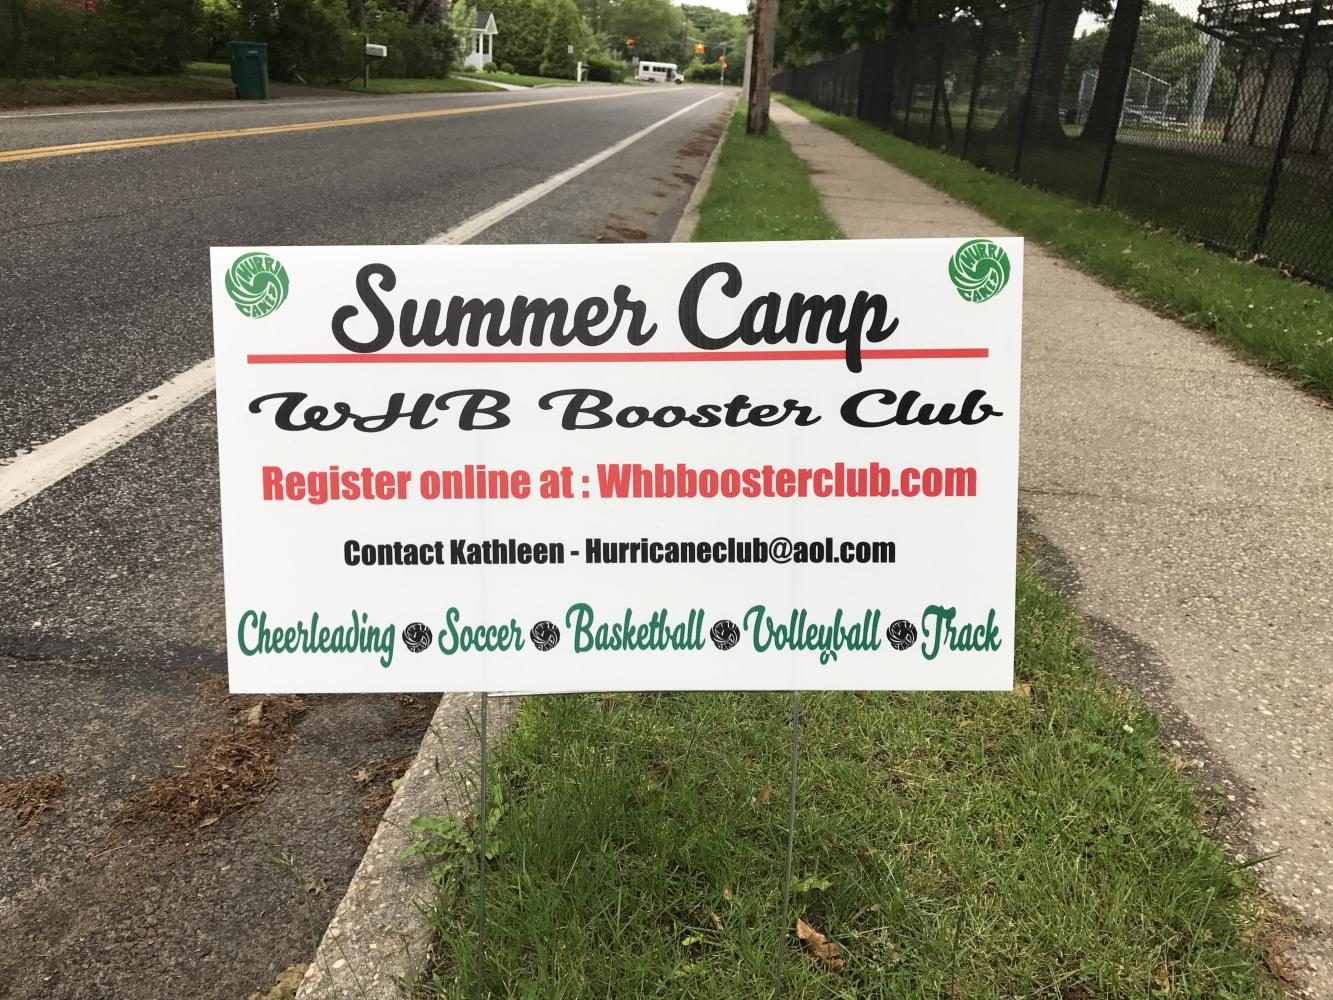 Booster Club Introduces New Camp